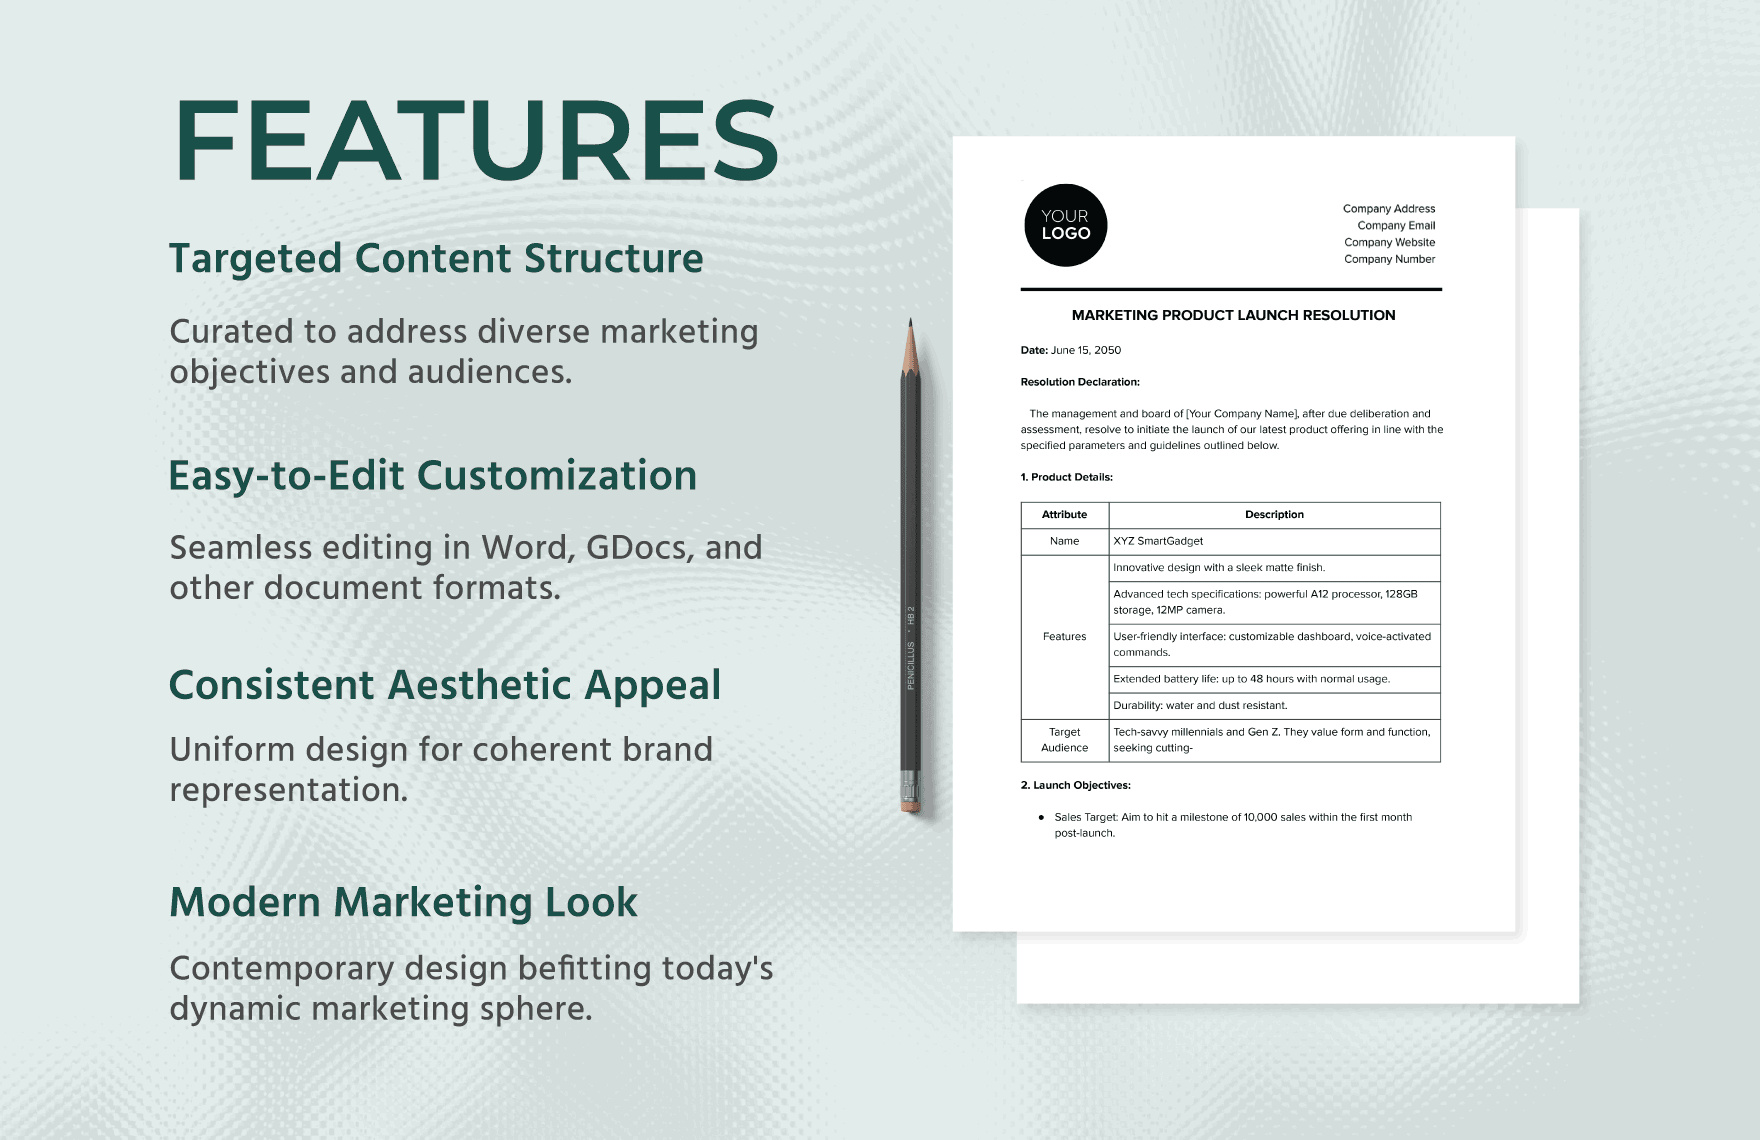 Marketing Product Launch Resolution Template